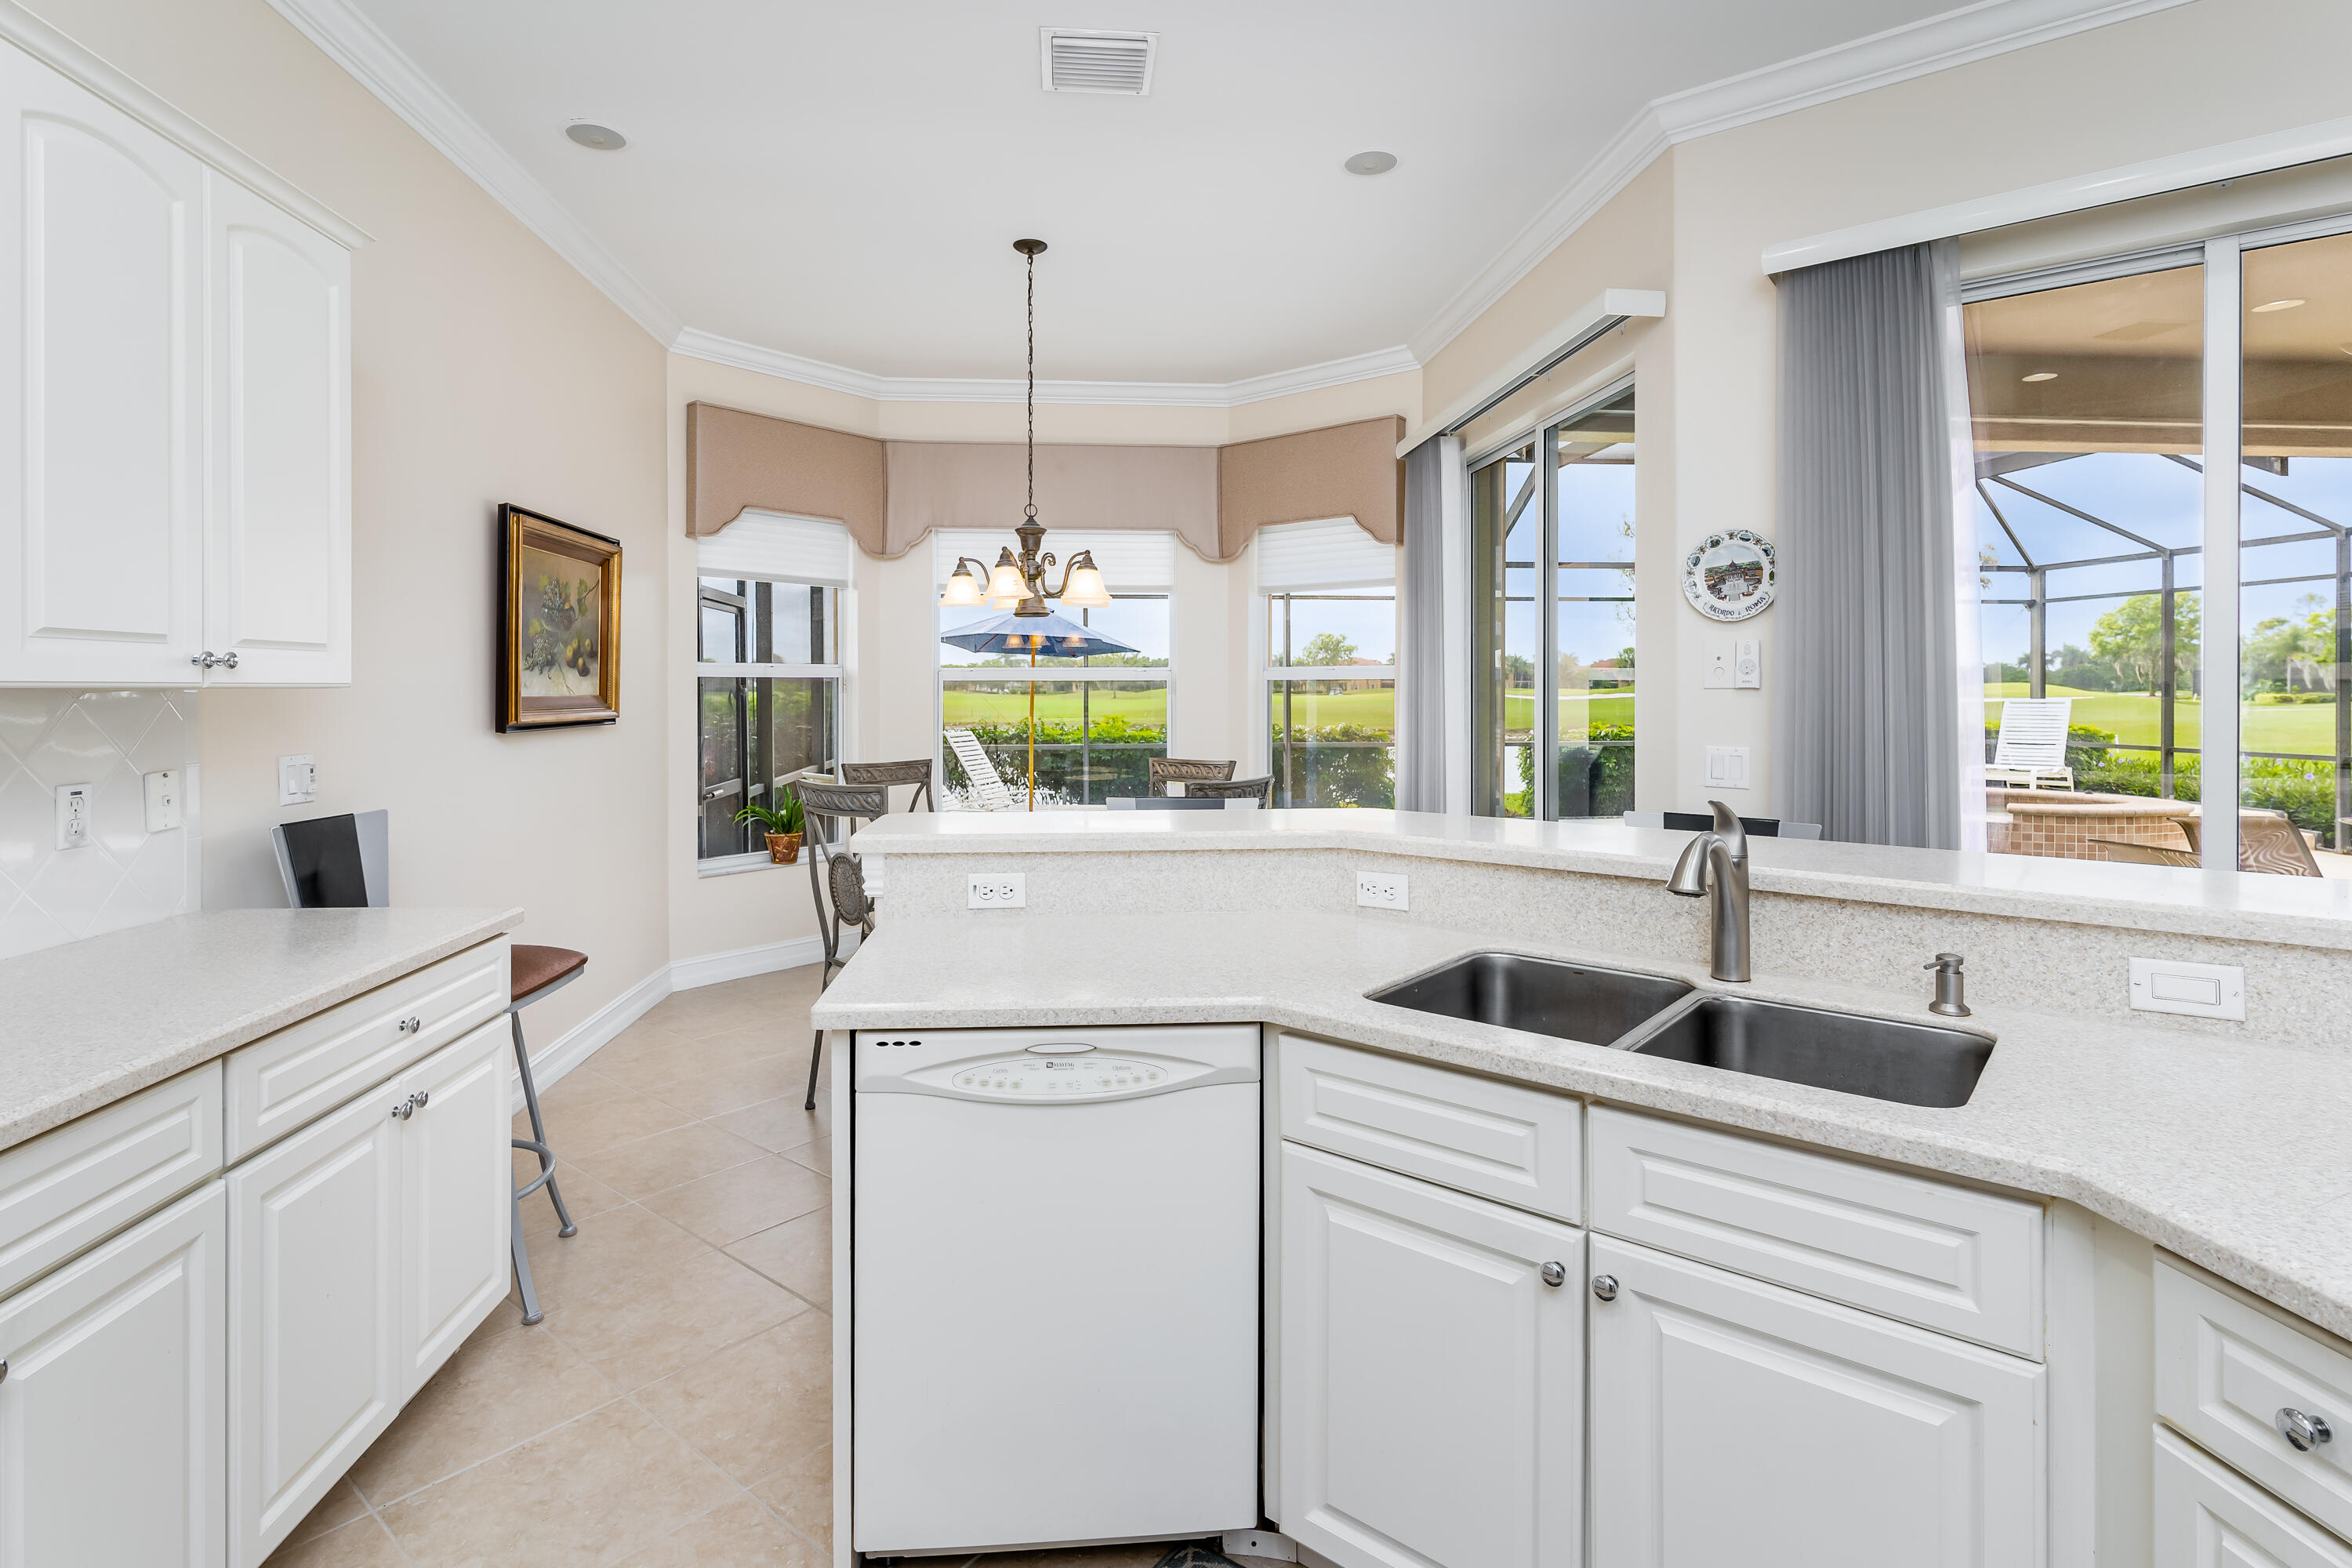 6730 Bent Grass Drive, Naples, Florida, 34113, United States, 3 Bedrooms Bedrooms, ,2 BathroomsBathrooms,Residential,For Sale,6730 bent grass DR,1504591